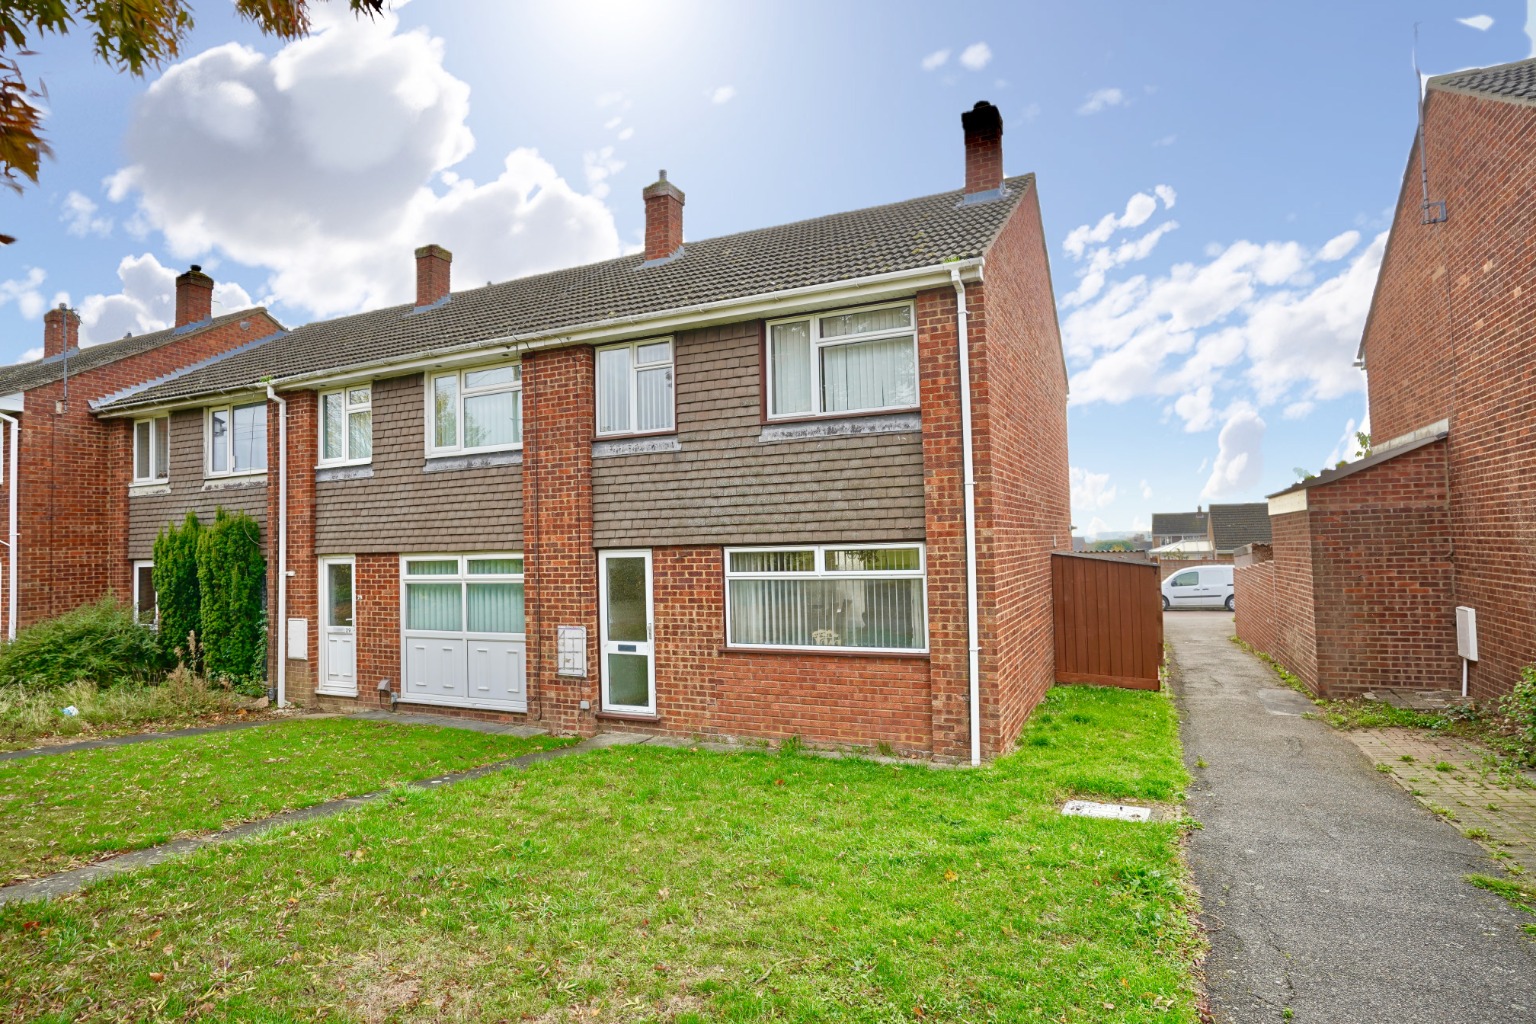 3 bed end of terrace house for sale in Prospero Way, Huntingdon - Property Image 1